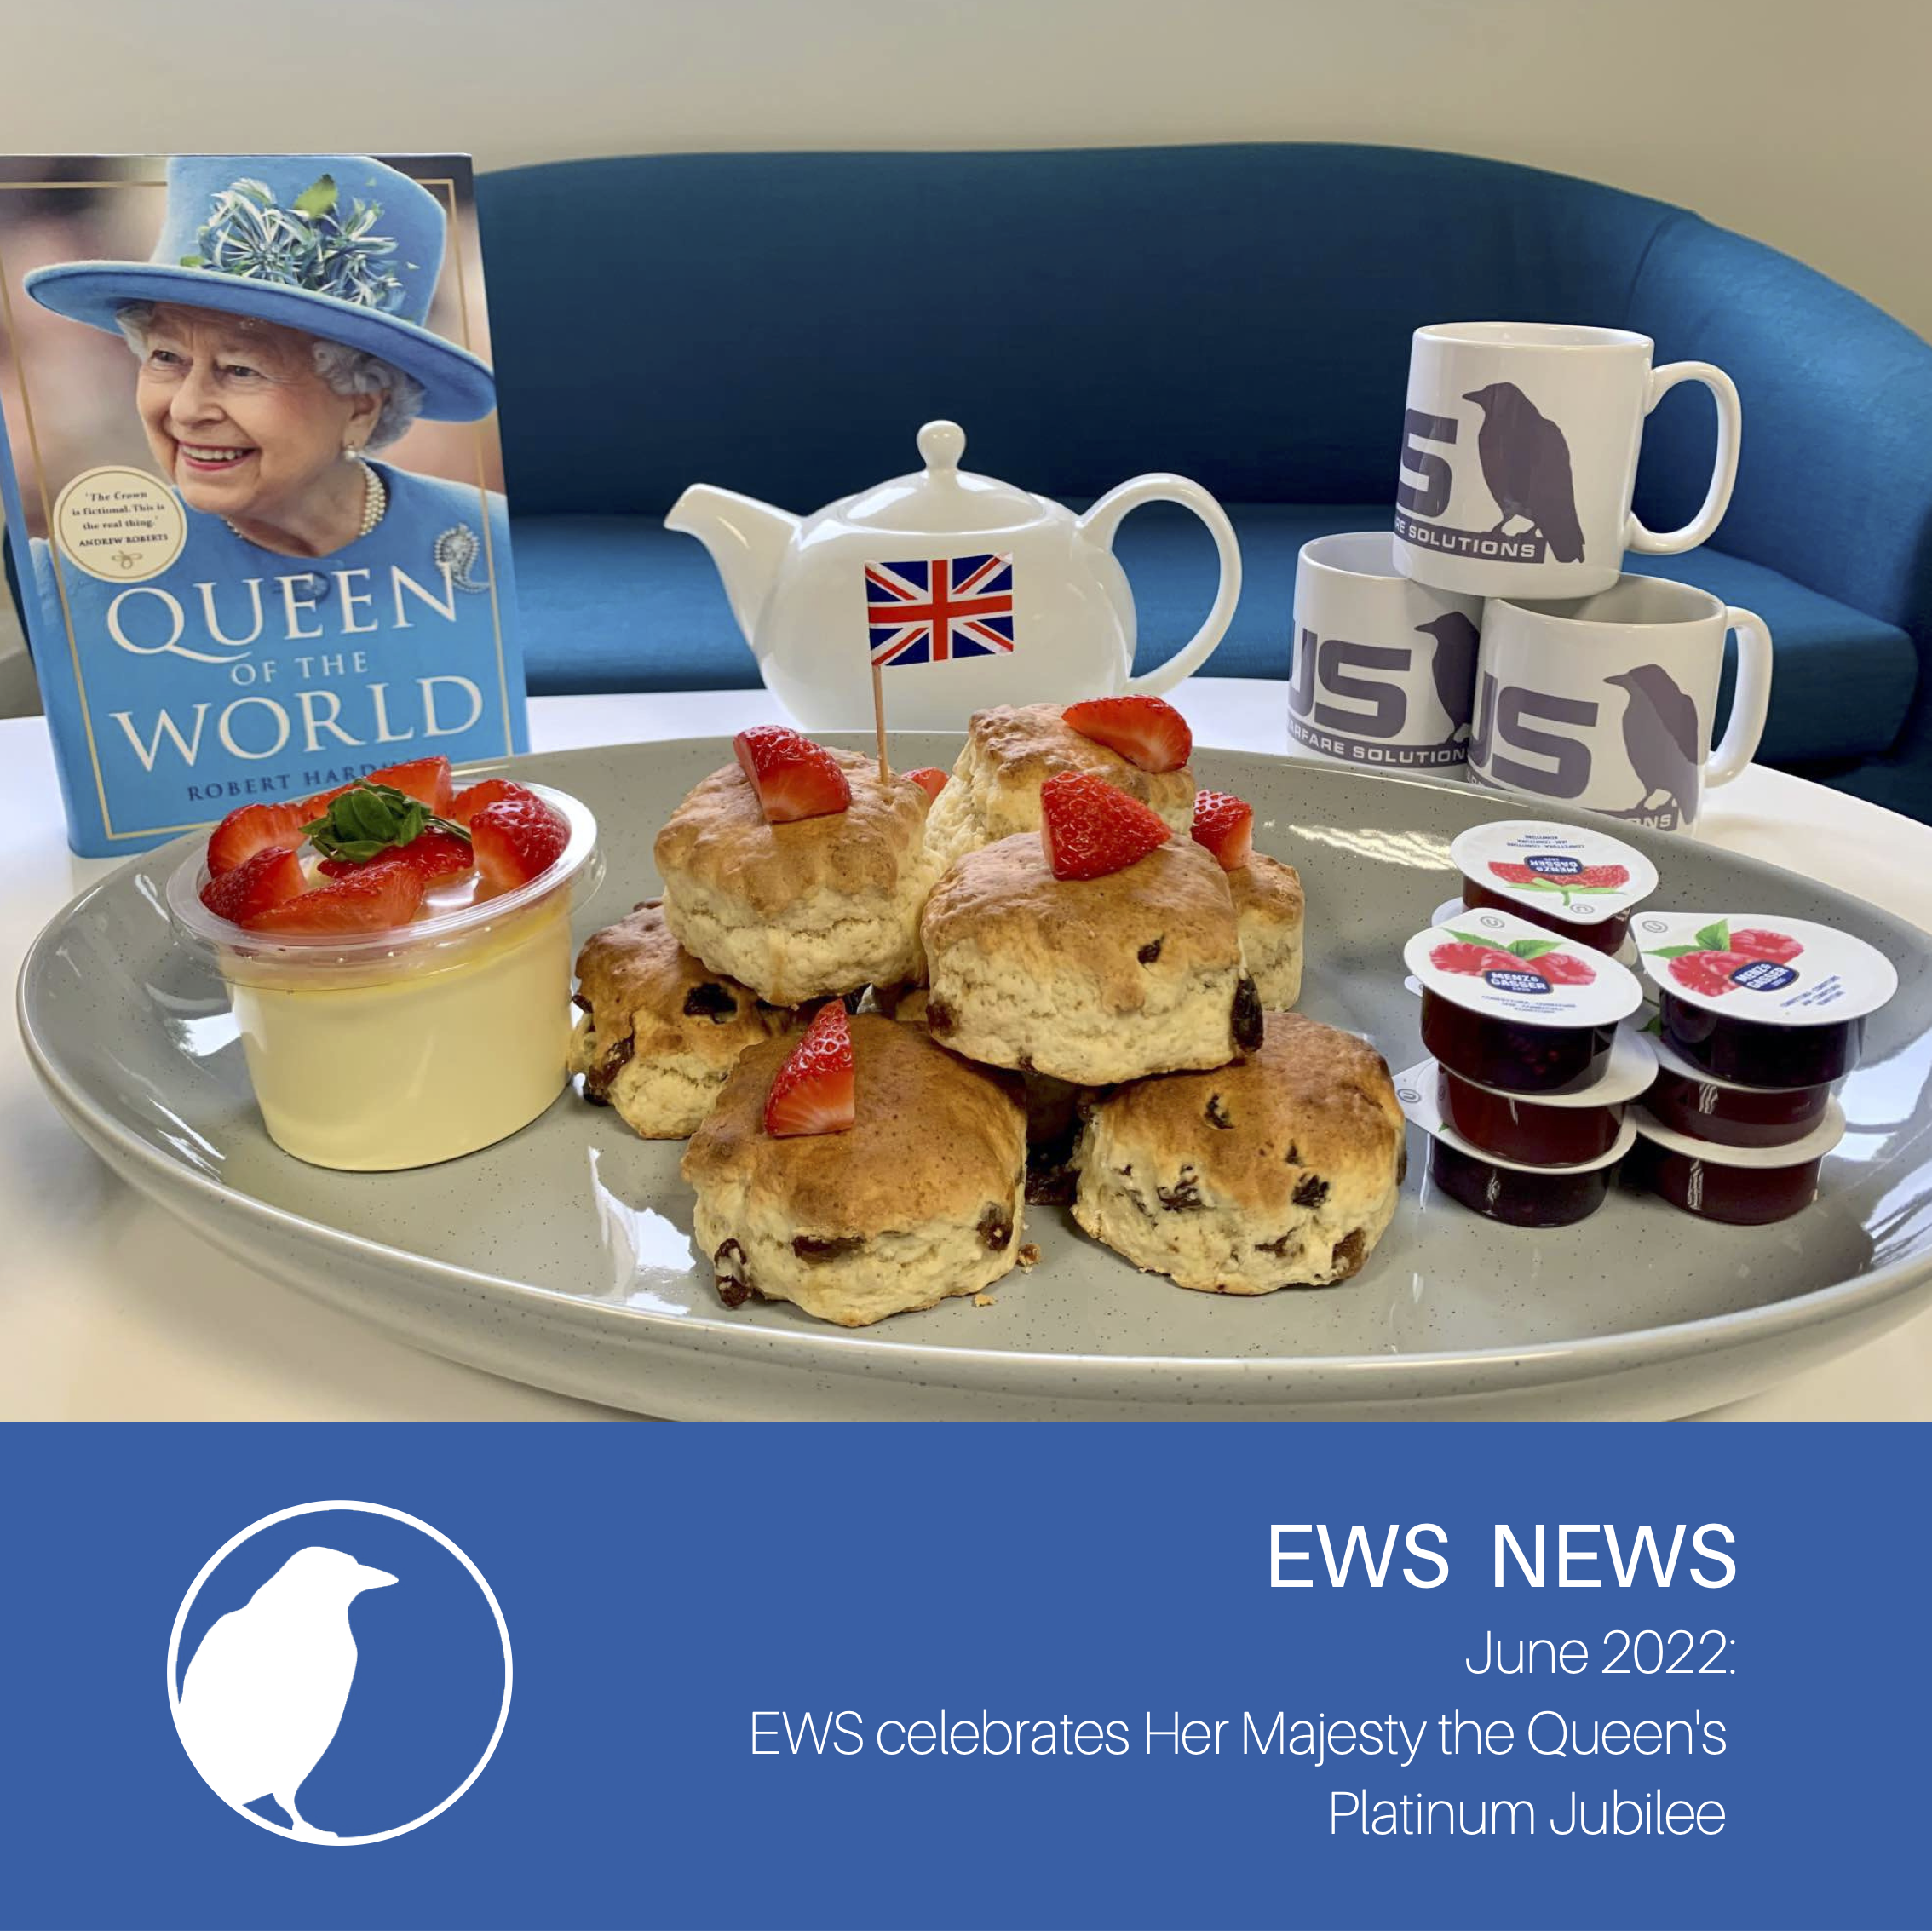 As part of Social Values, EWS celebrated the Queen's Platinum Jubilee